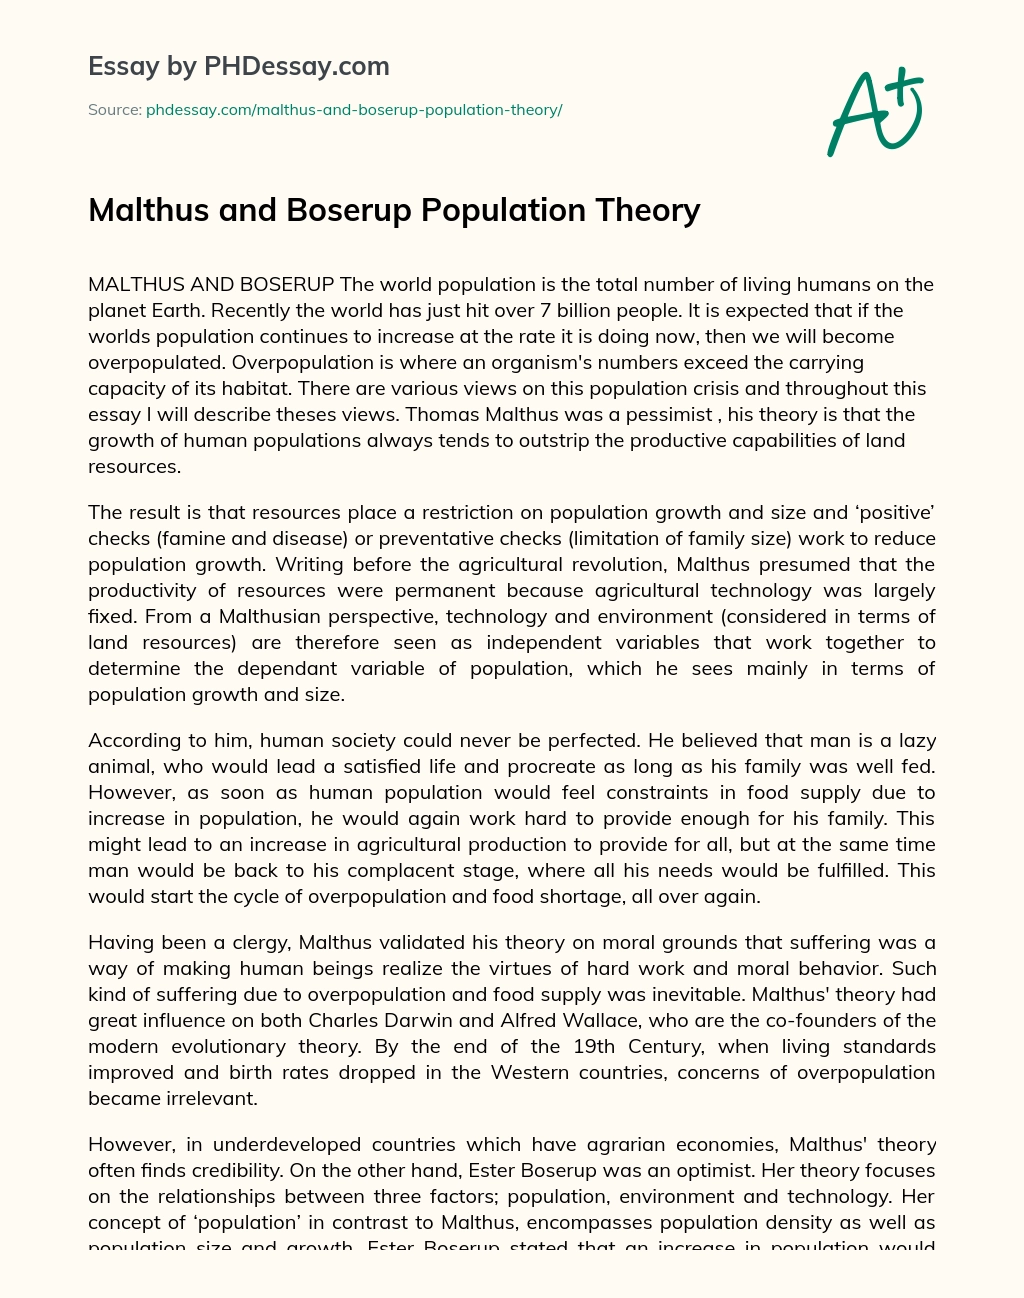 Malthus and Boserup Population Theory essay